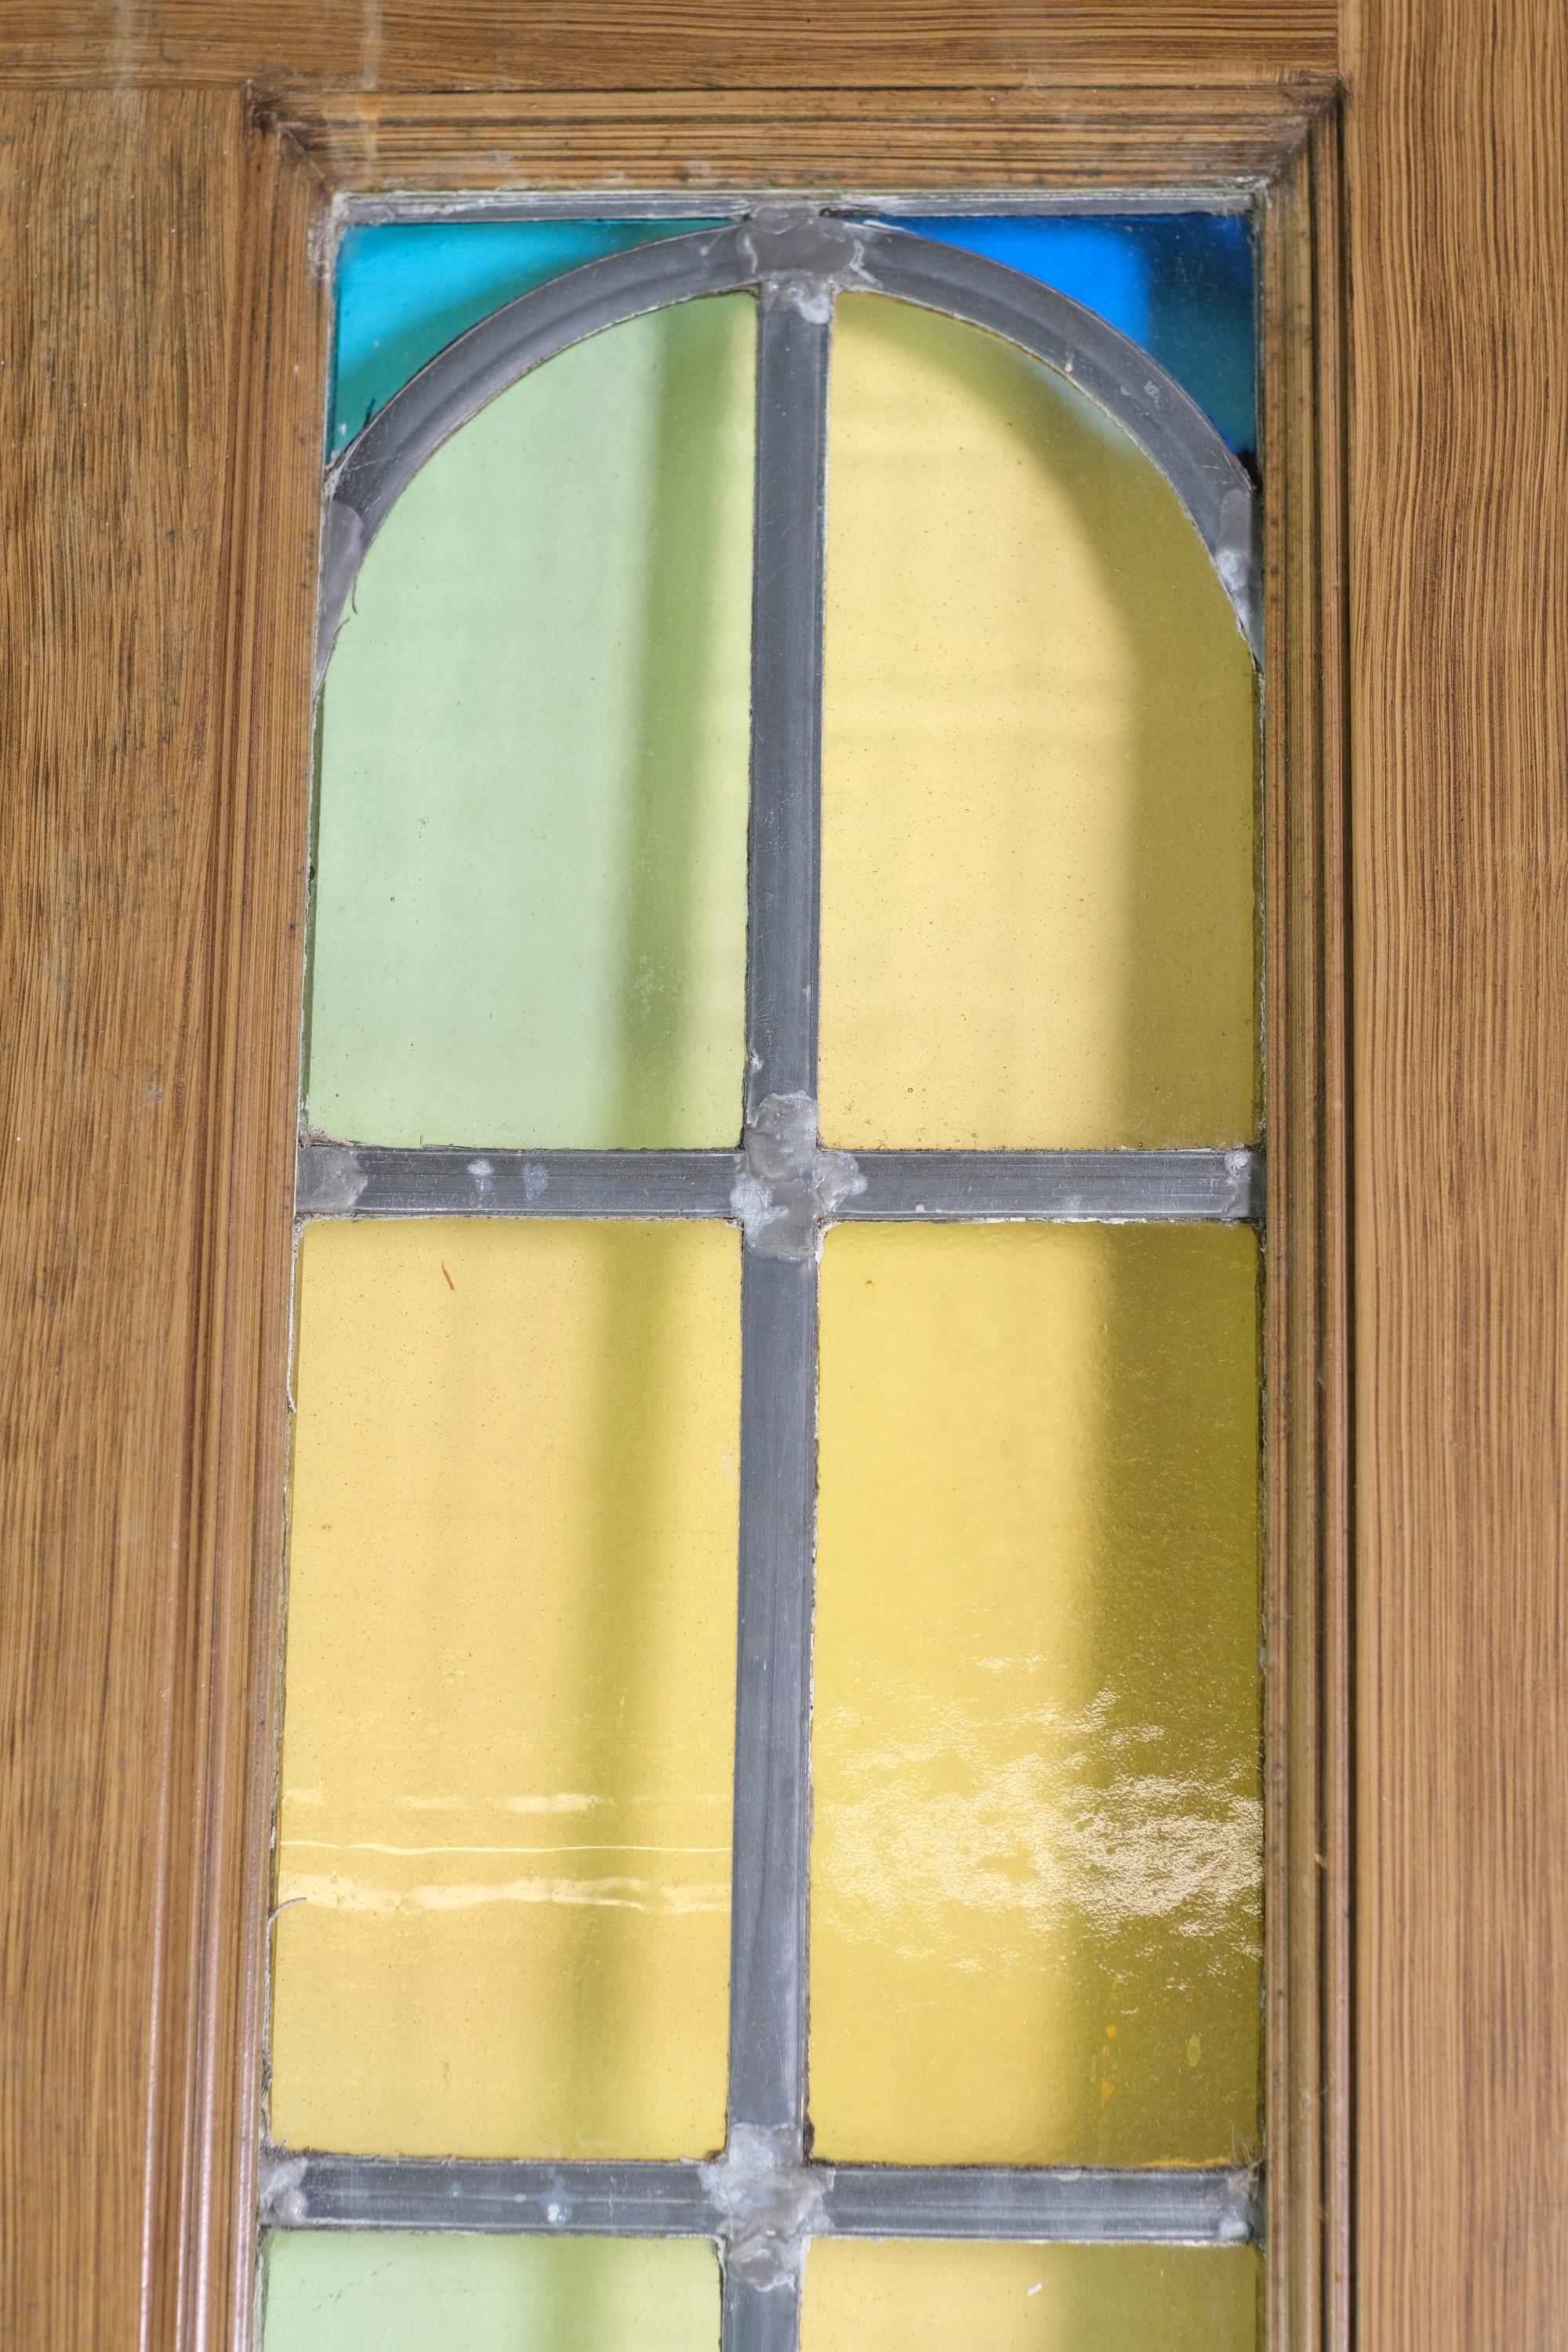 These 1930s steel doors have a faux oak finish and leaded stained glass arched windows.  The leaded windows are in good condition and have vibrant colors including yellow, green and blue.  The bottom of each door includes two recessed vertical